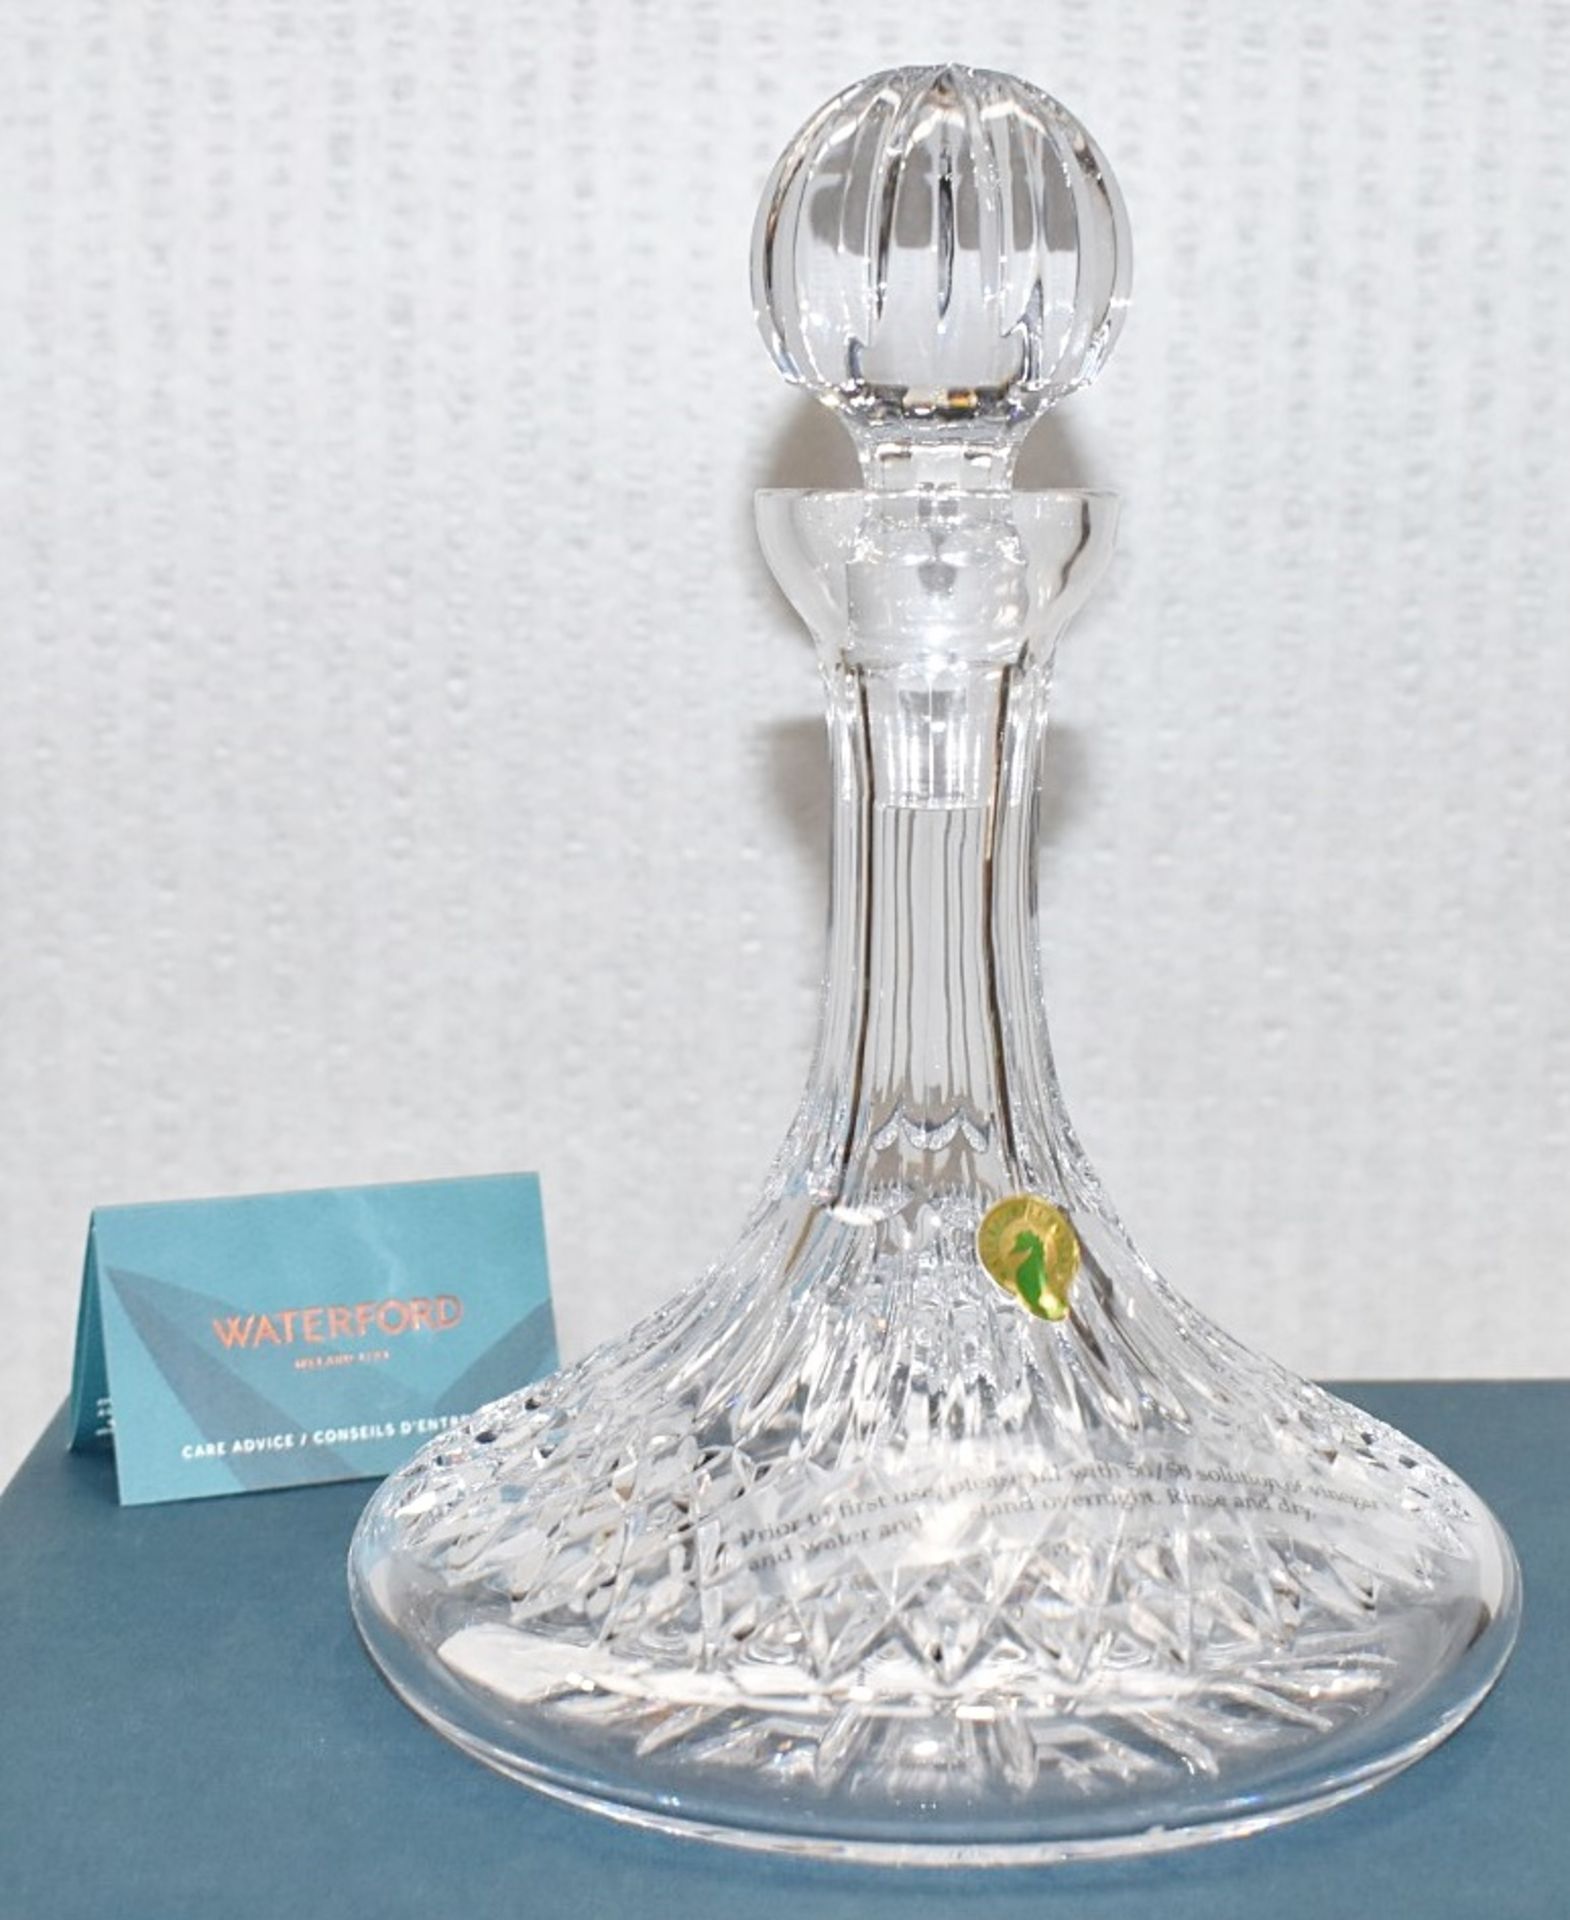 1 x WATERFORD 'Lismore' Lead Crystal Ships Decanter (850ml) - Original Price £450.00 - Boxed - Image 5 of 9